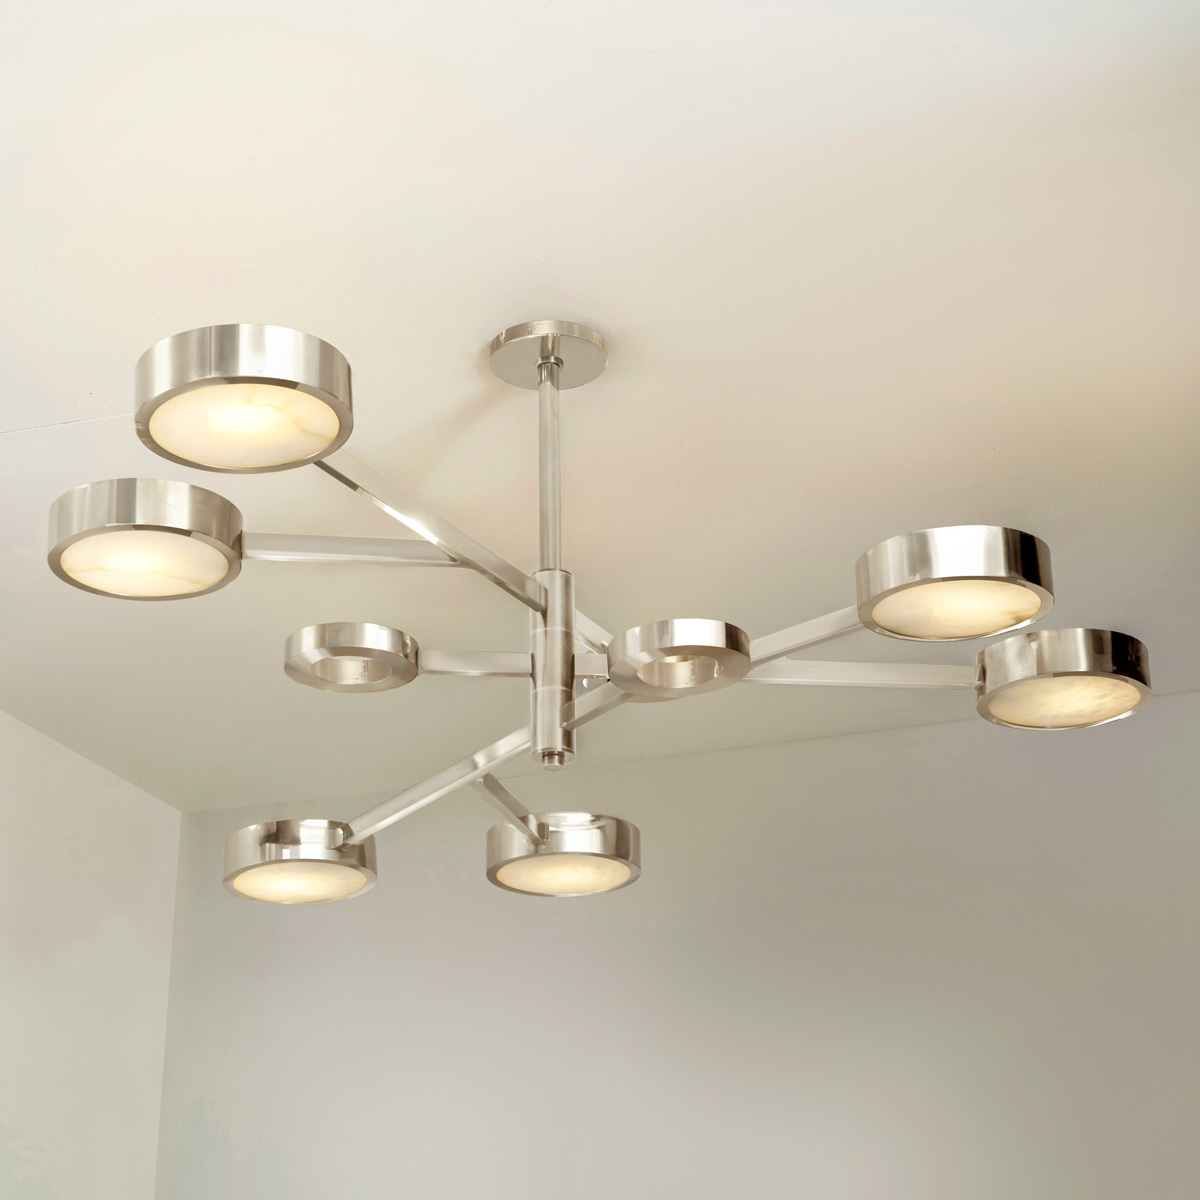 Volterra ceiling light by gaspare asaro